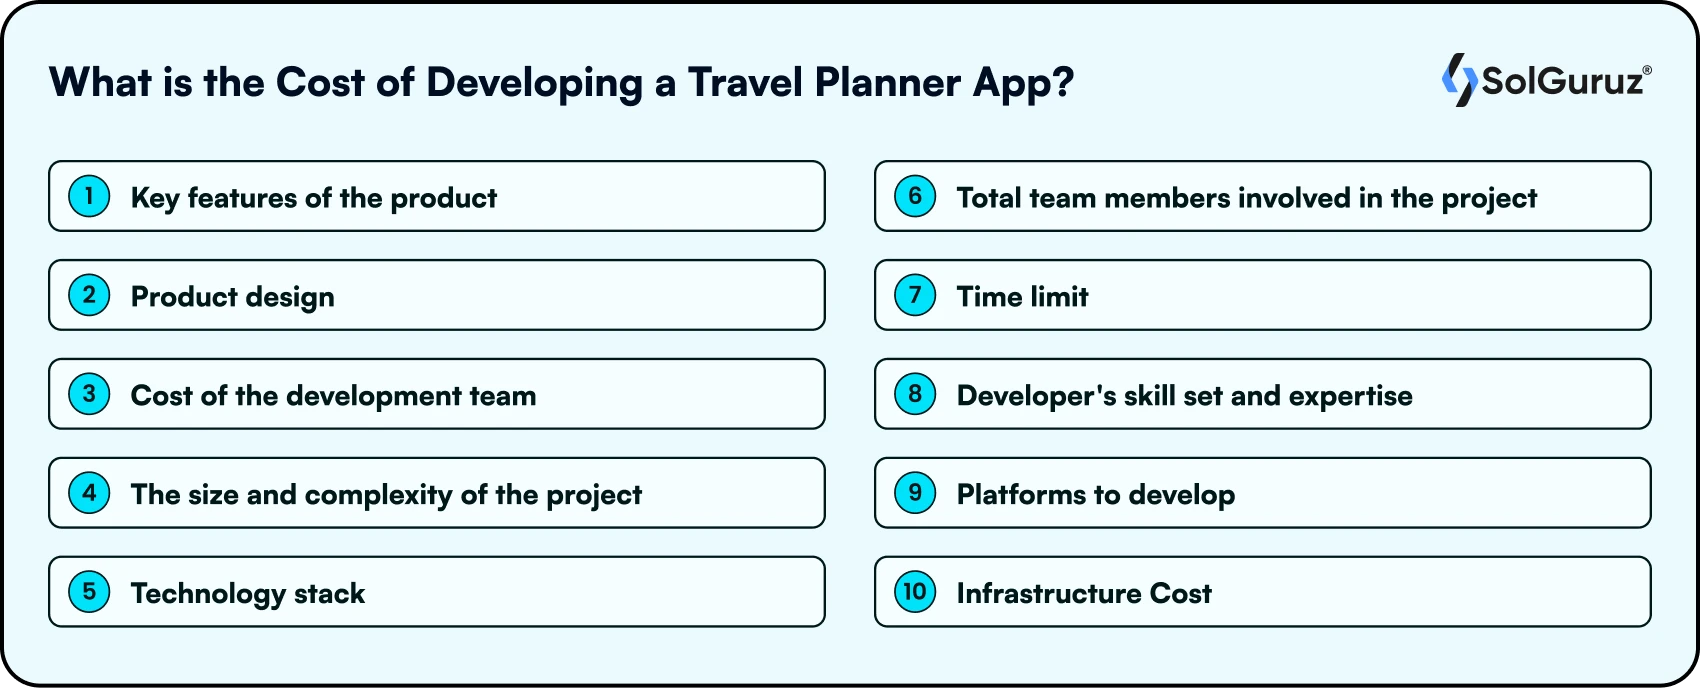 What is the Cost of Developing a Travel Planner App?